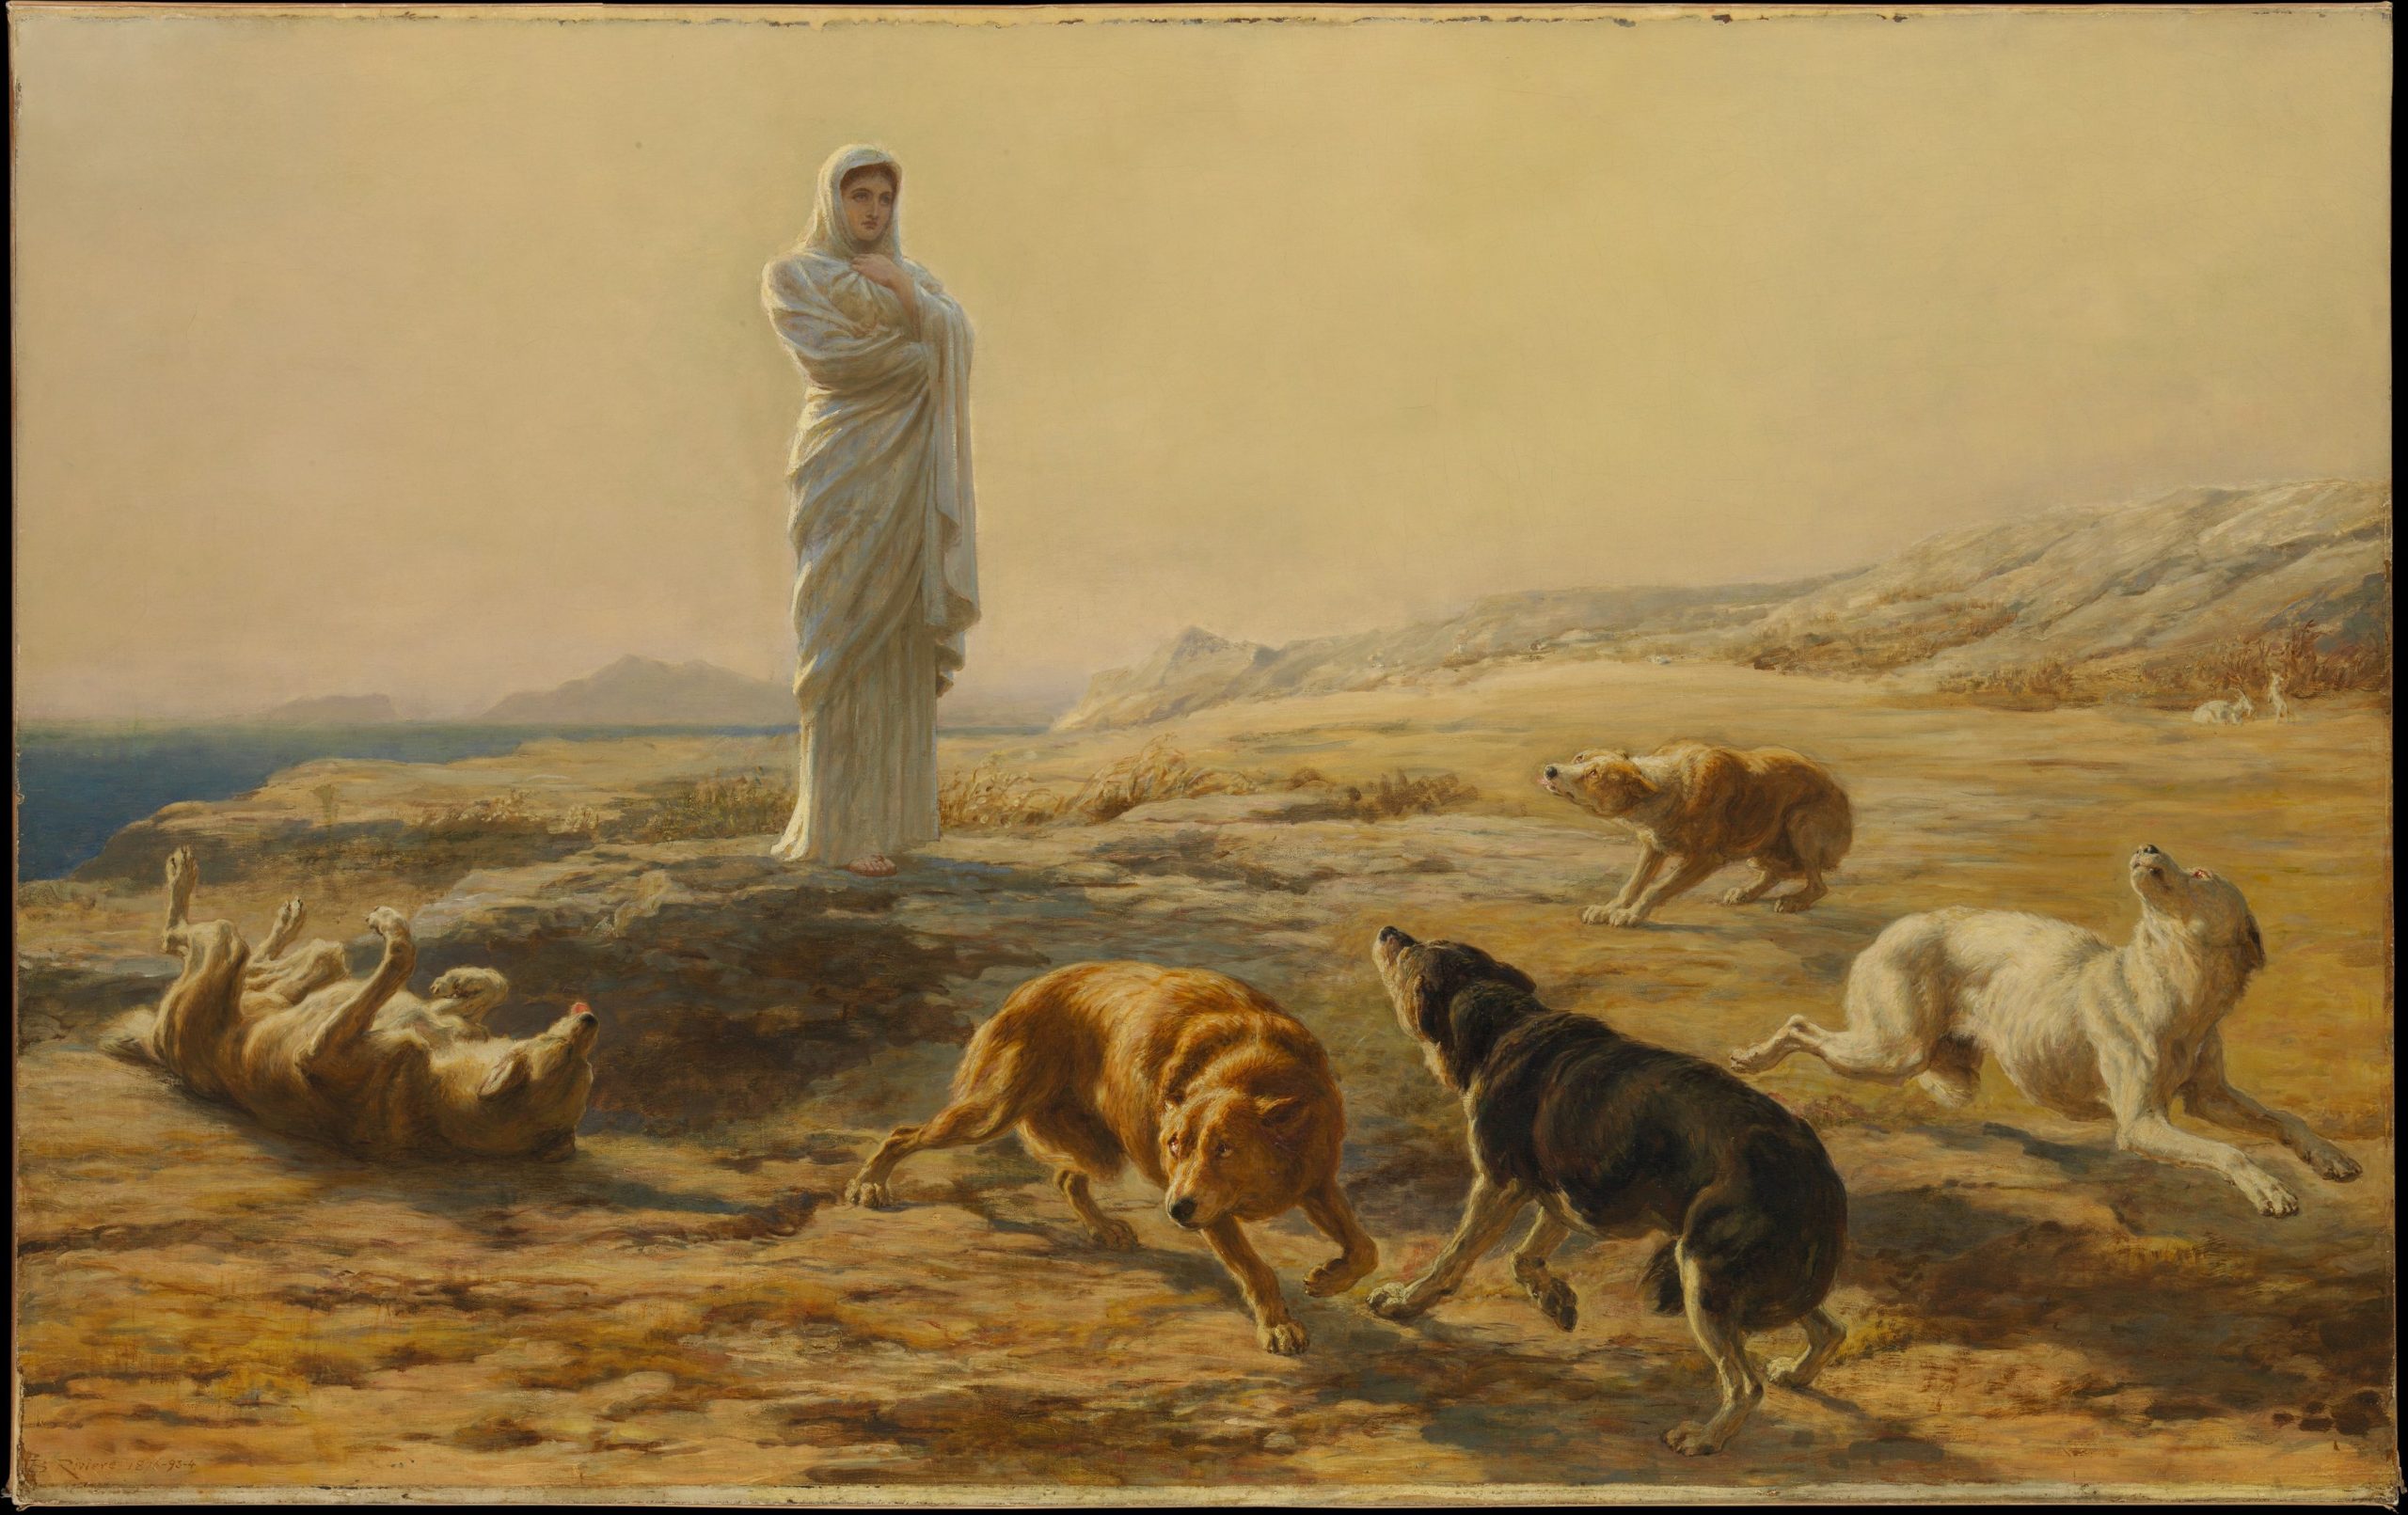 A woman in a desert standing before a group of five dogs seemingly fearful of her presence